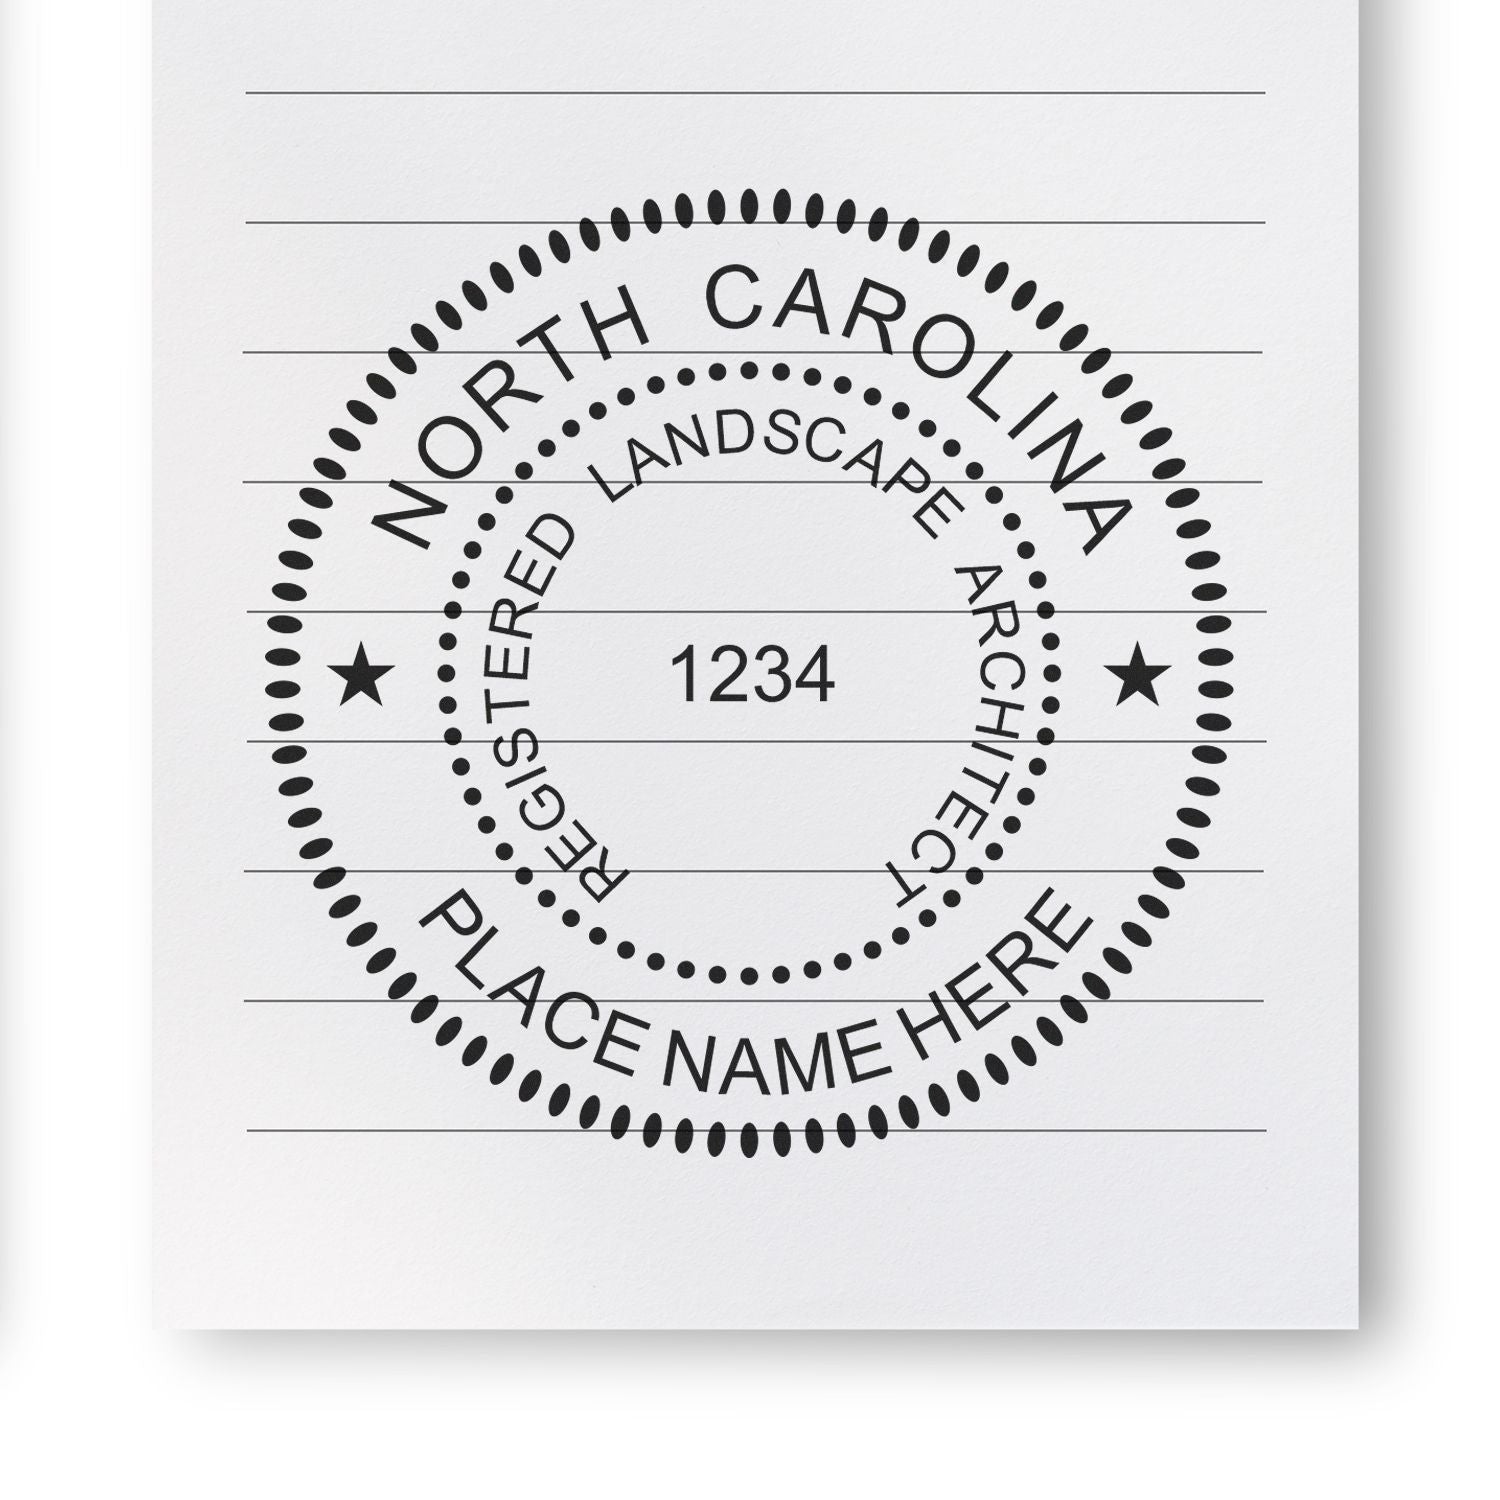 The main image for the Digital North Carolina Landscape Architect Stamp depicting a sample of the imprint and electronic files